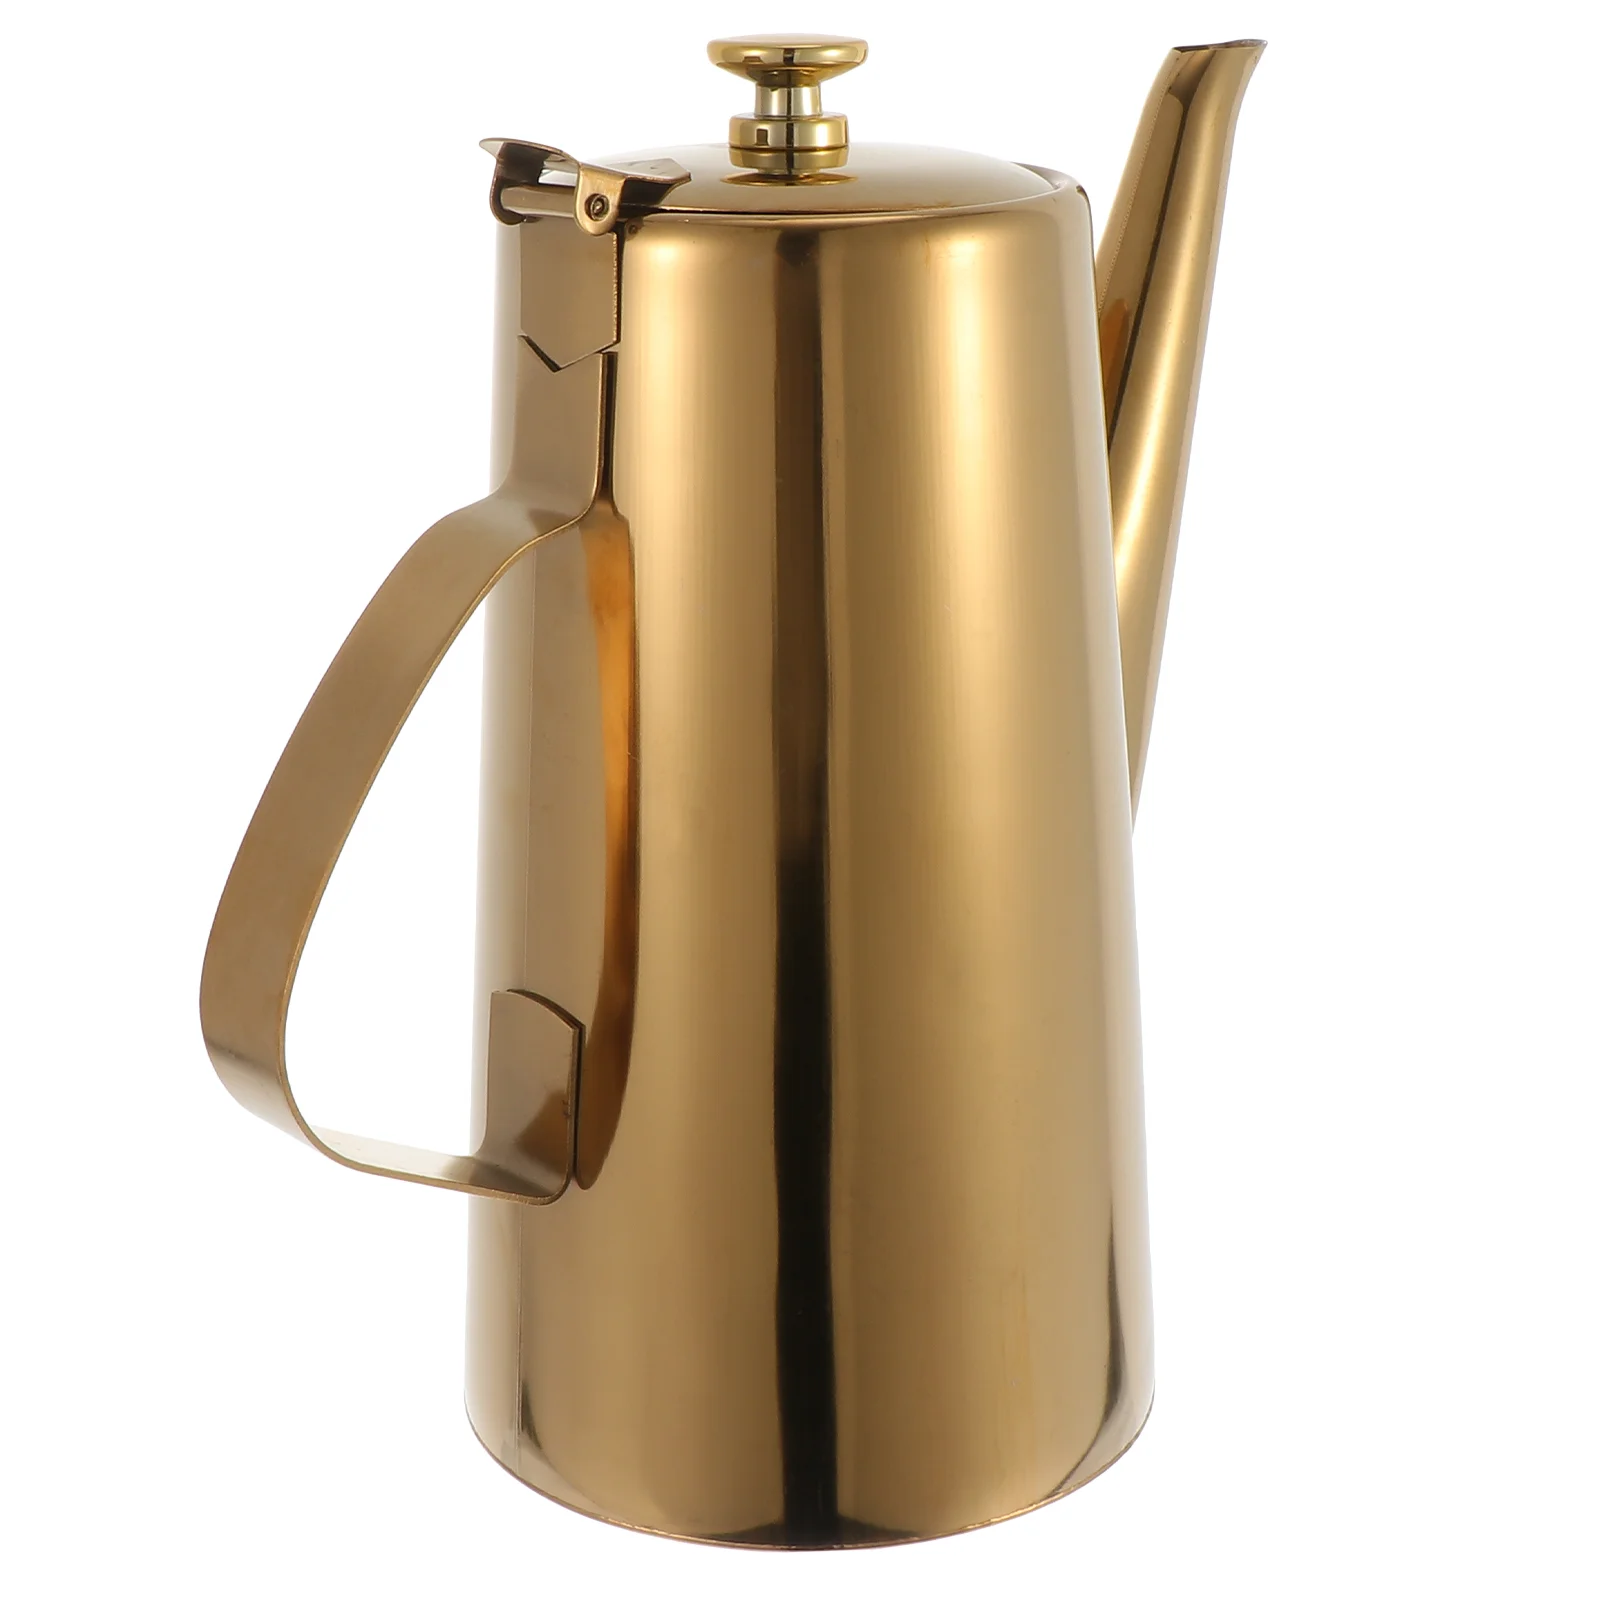 

Cabilock Grease Container Olive Oil Dispenser Bottle Stainless Steel Spout Oil Pot Drip Free Pouring Spout Soy Sauce